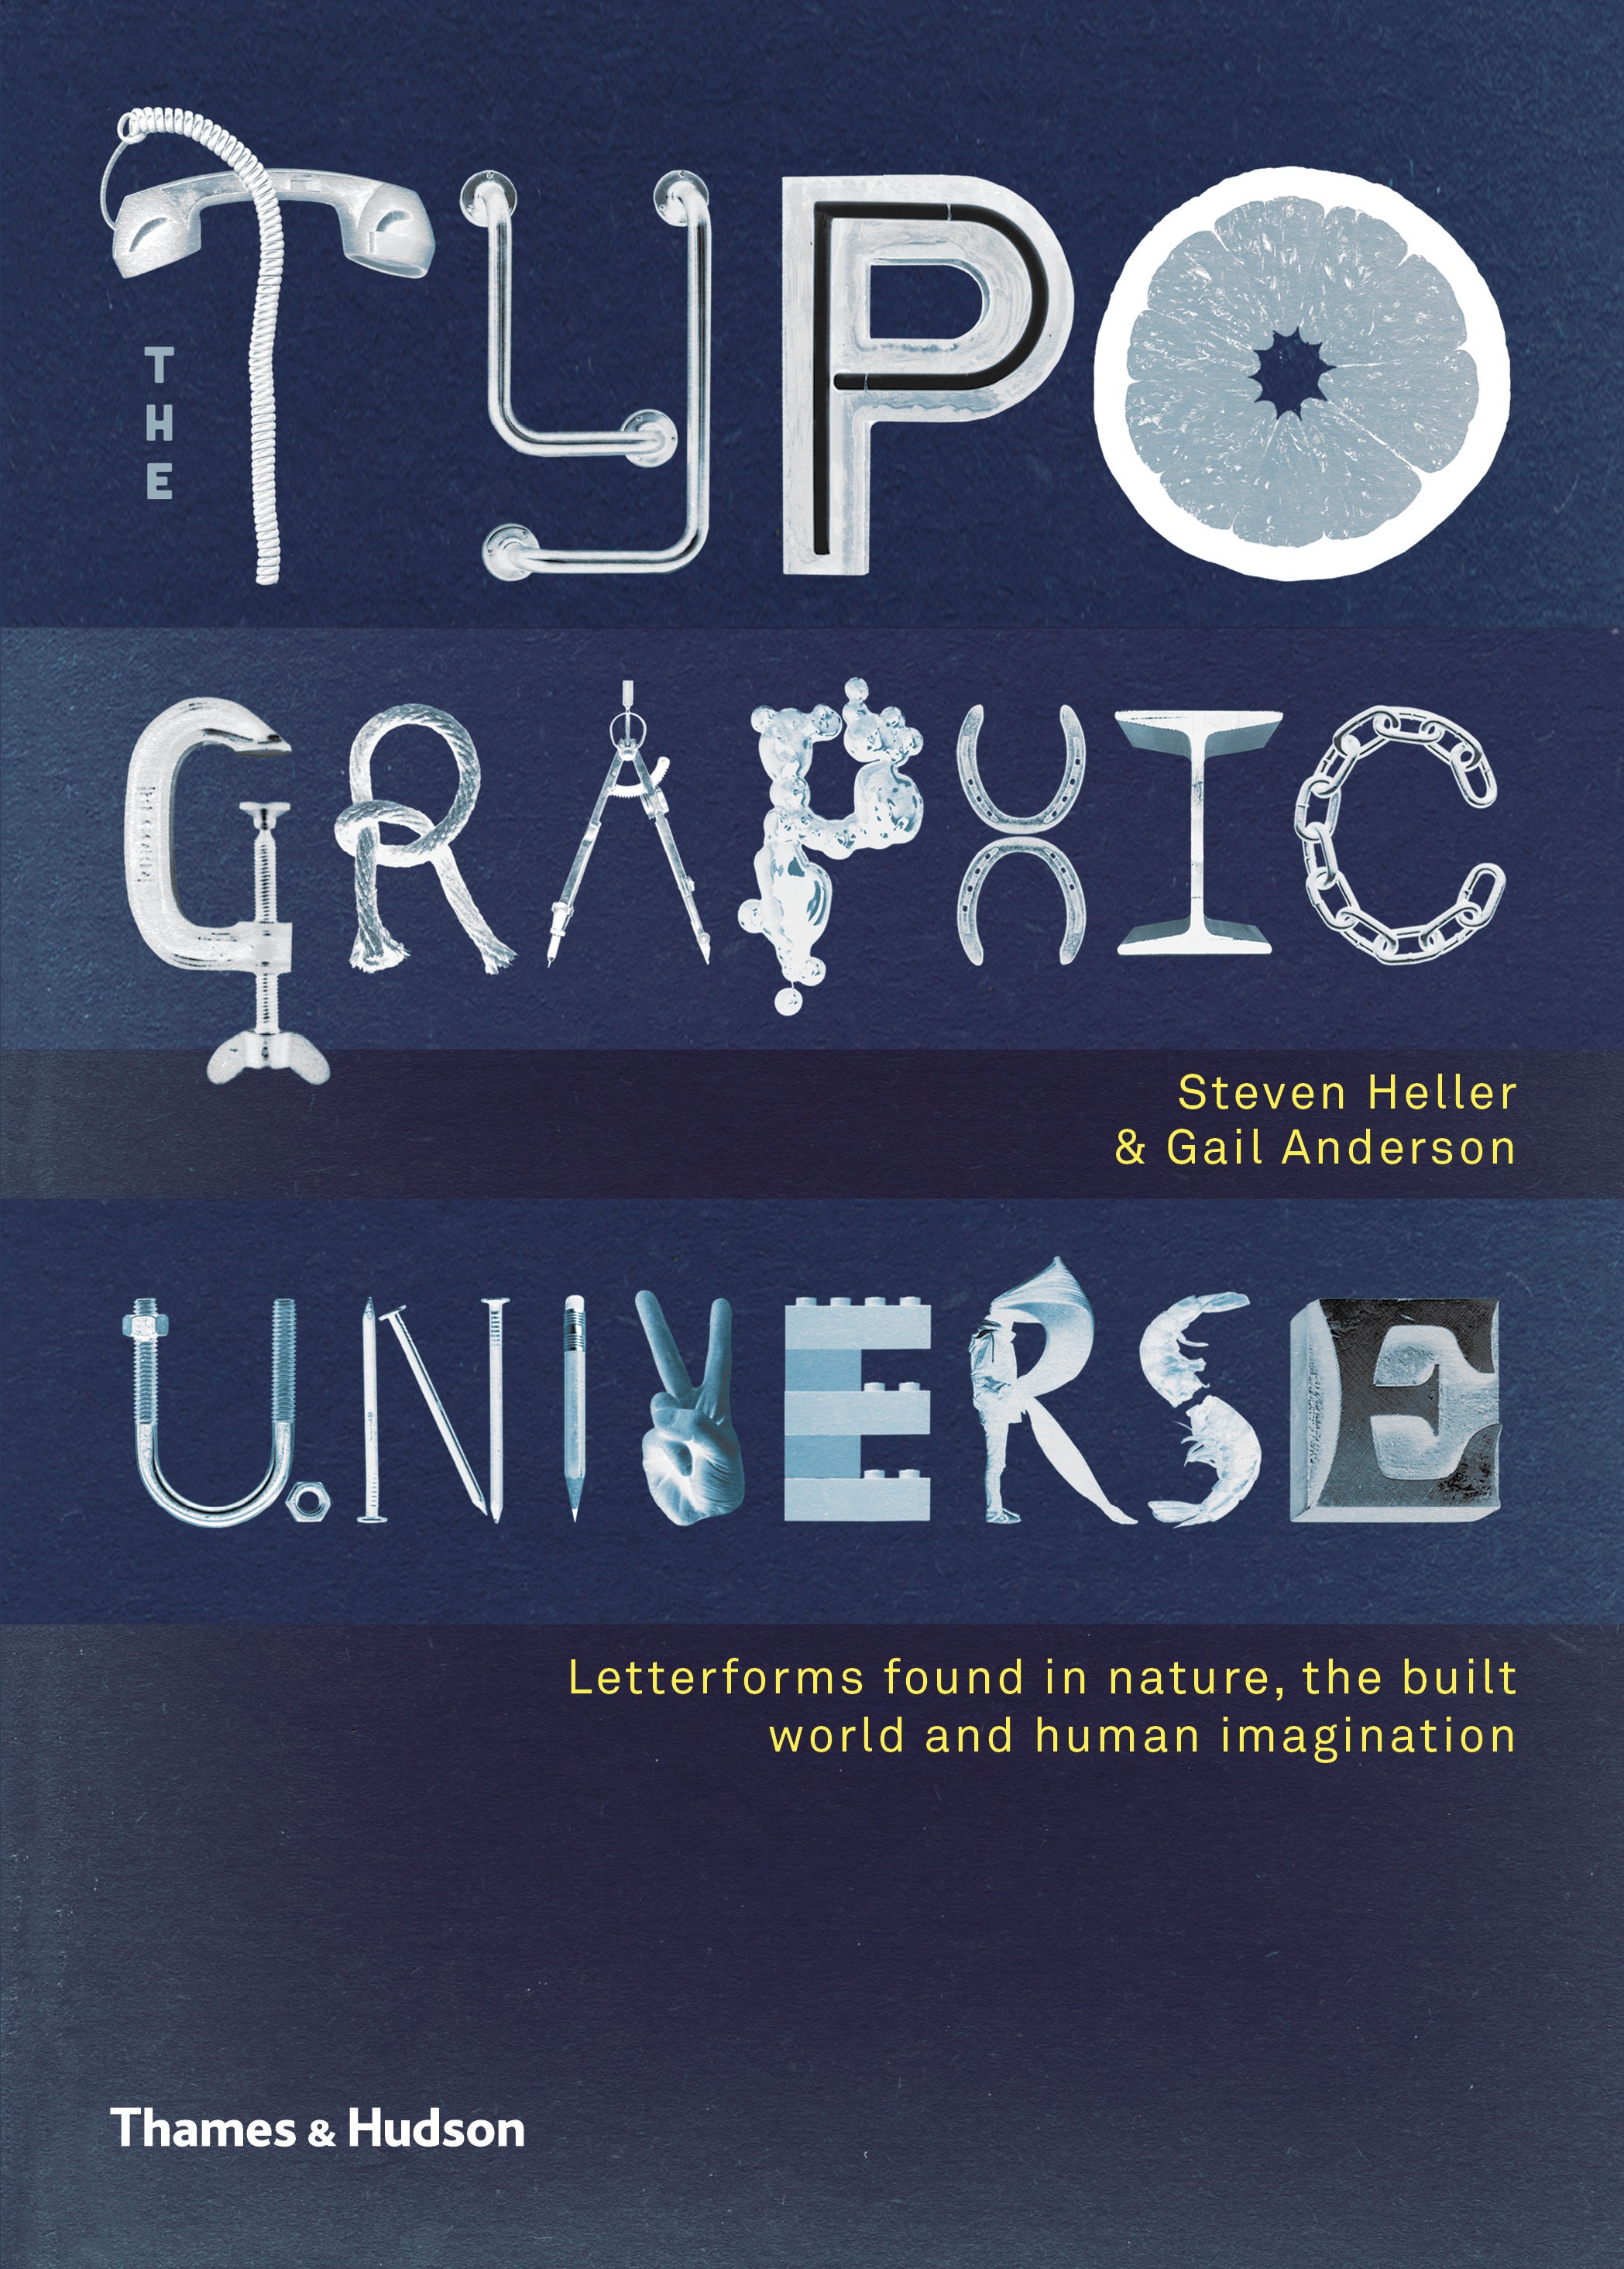 Book Launch: Typographic Universe by Steven Heller and Gail Anderson